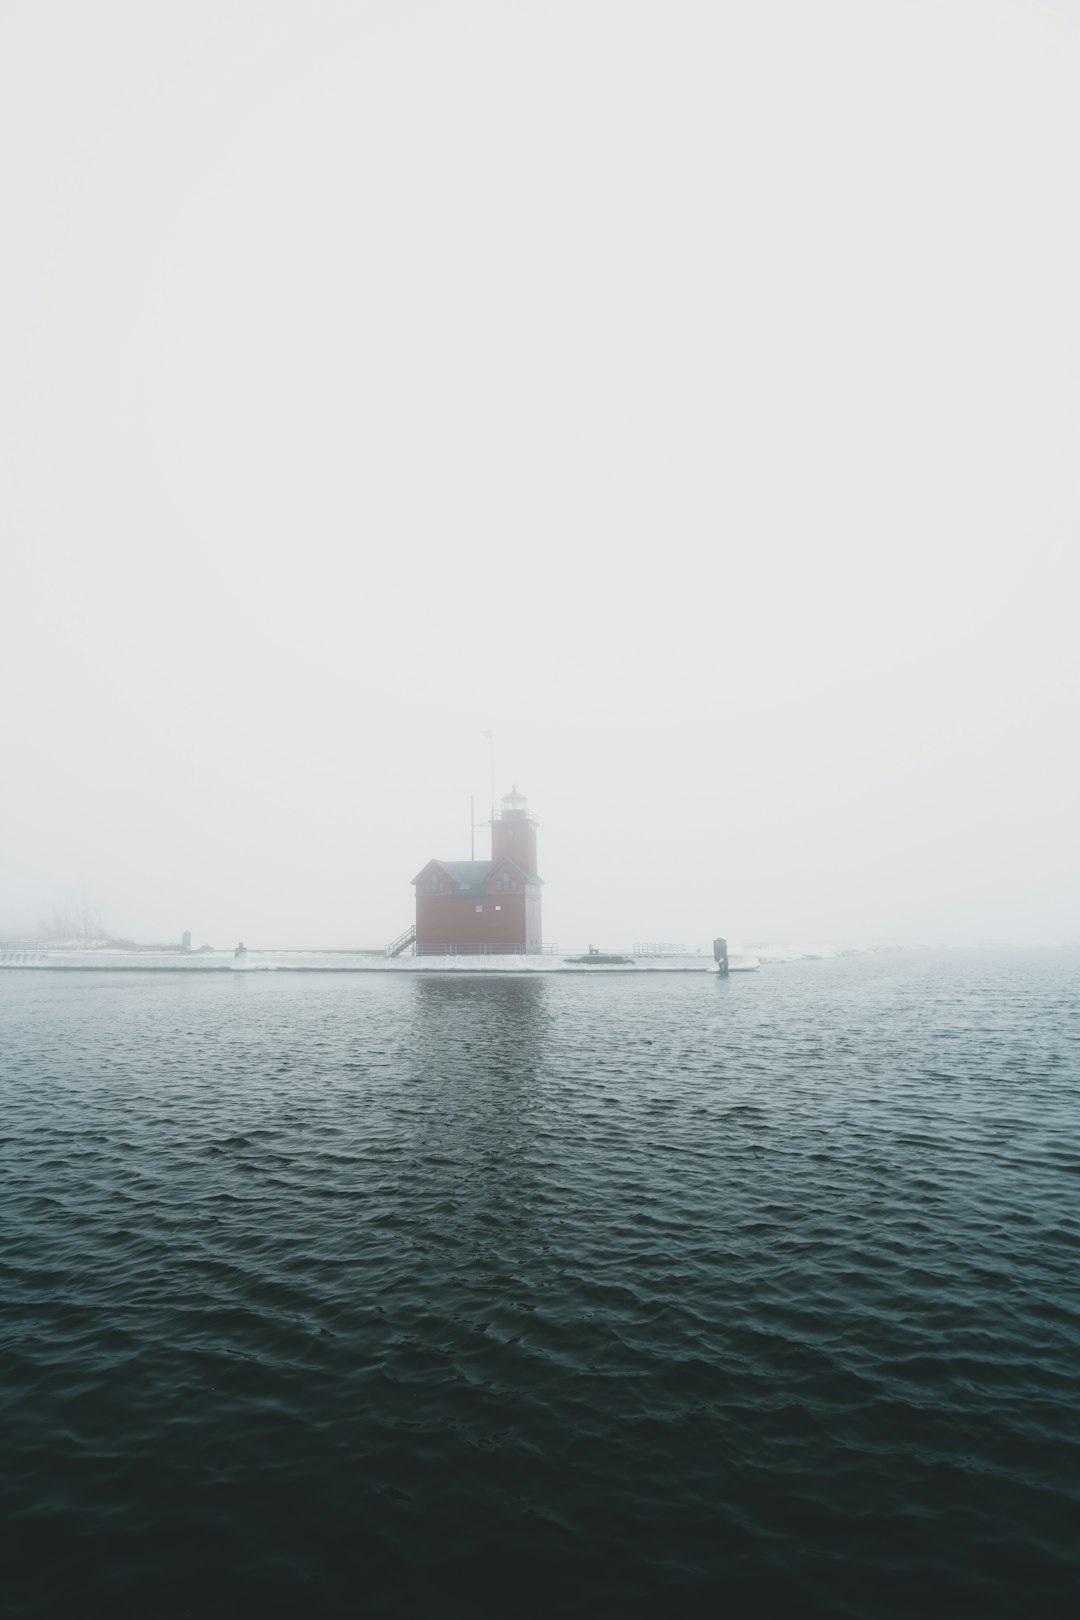 black ship on sea during foggy weather